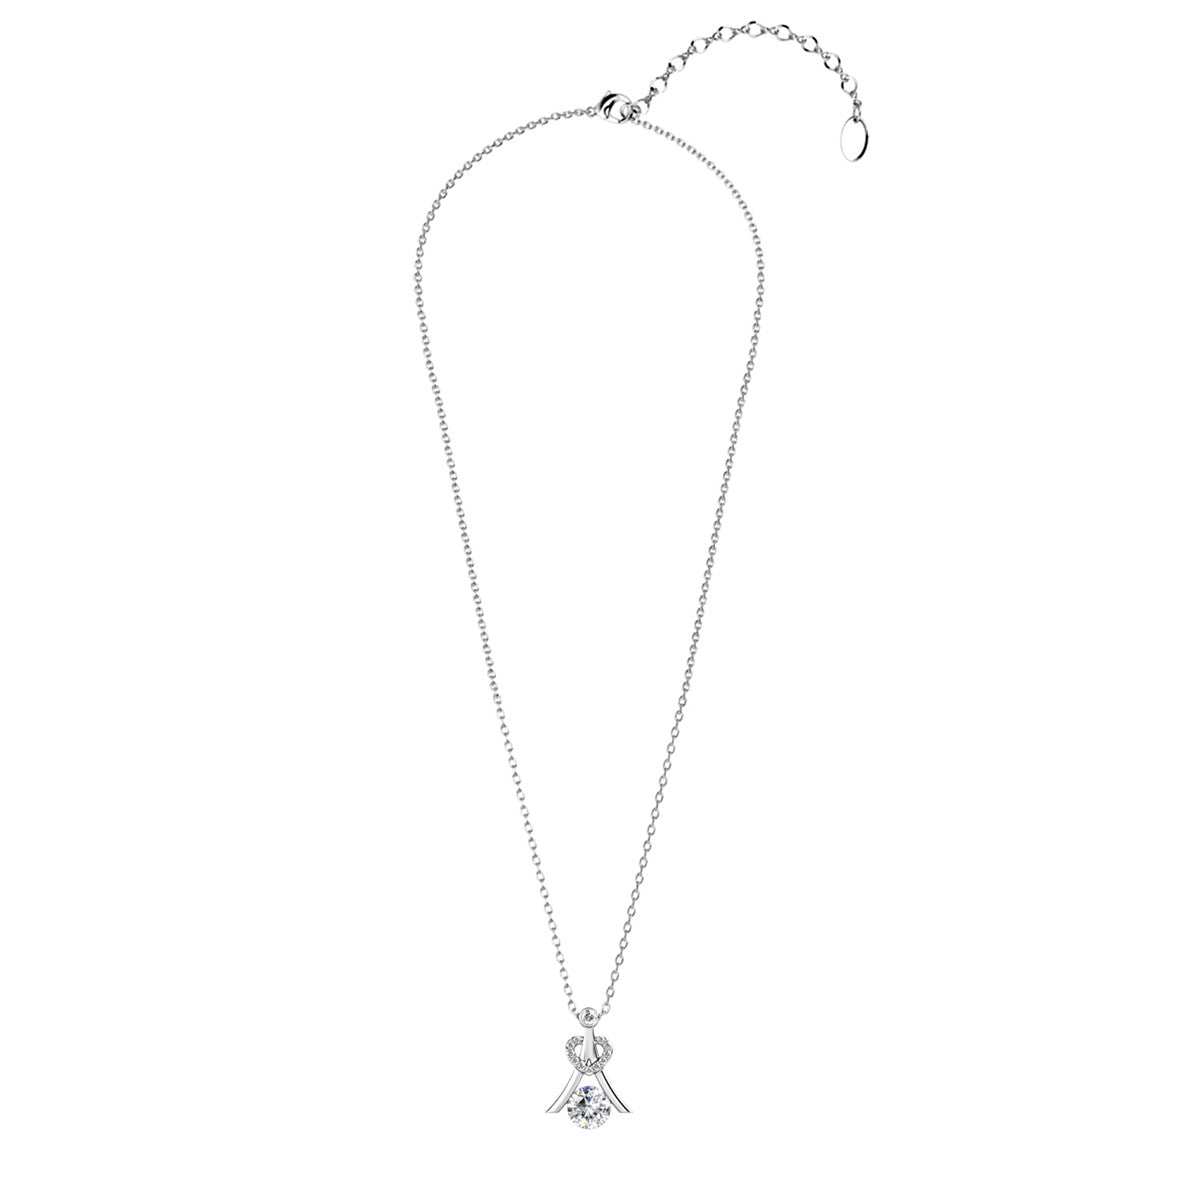 Serenity Birthstone Necklace 18k White Gold Plated with Round Cut Crystals